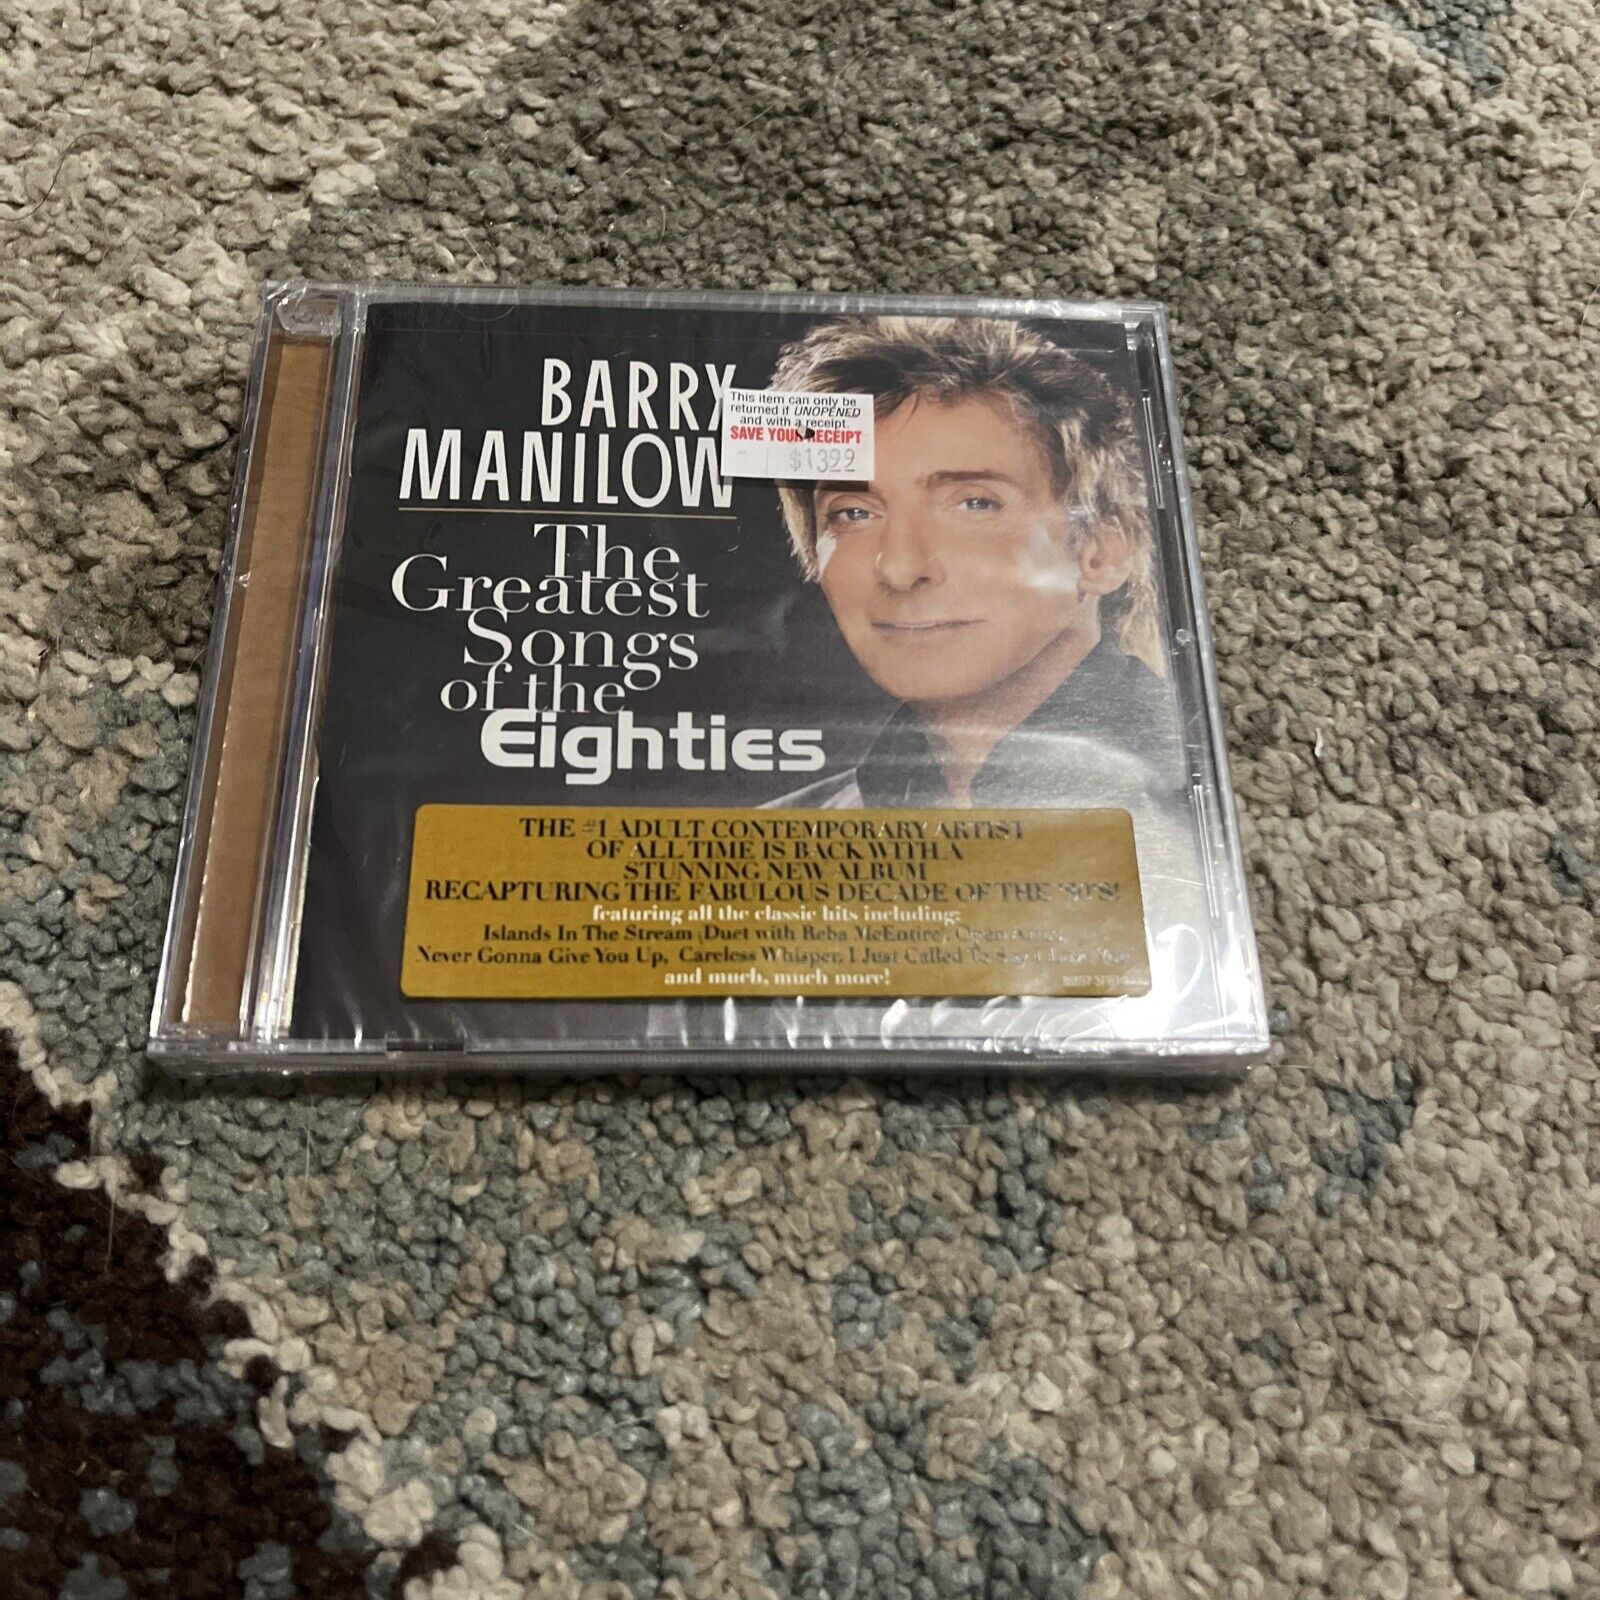 Barry Manilow CD The Greatest Songs of the Eighties 80s 2008 Arista New Sealed